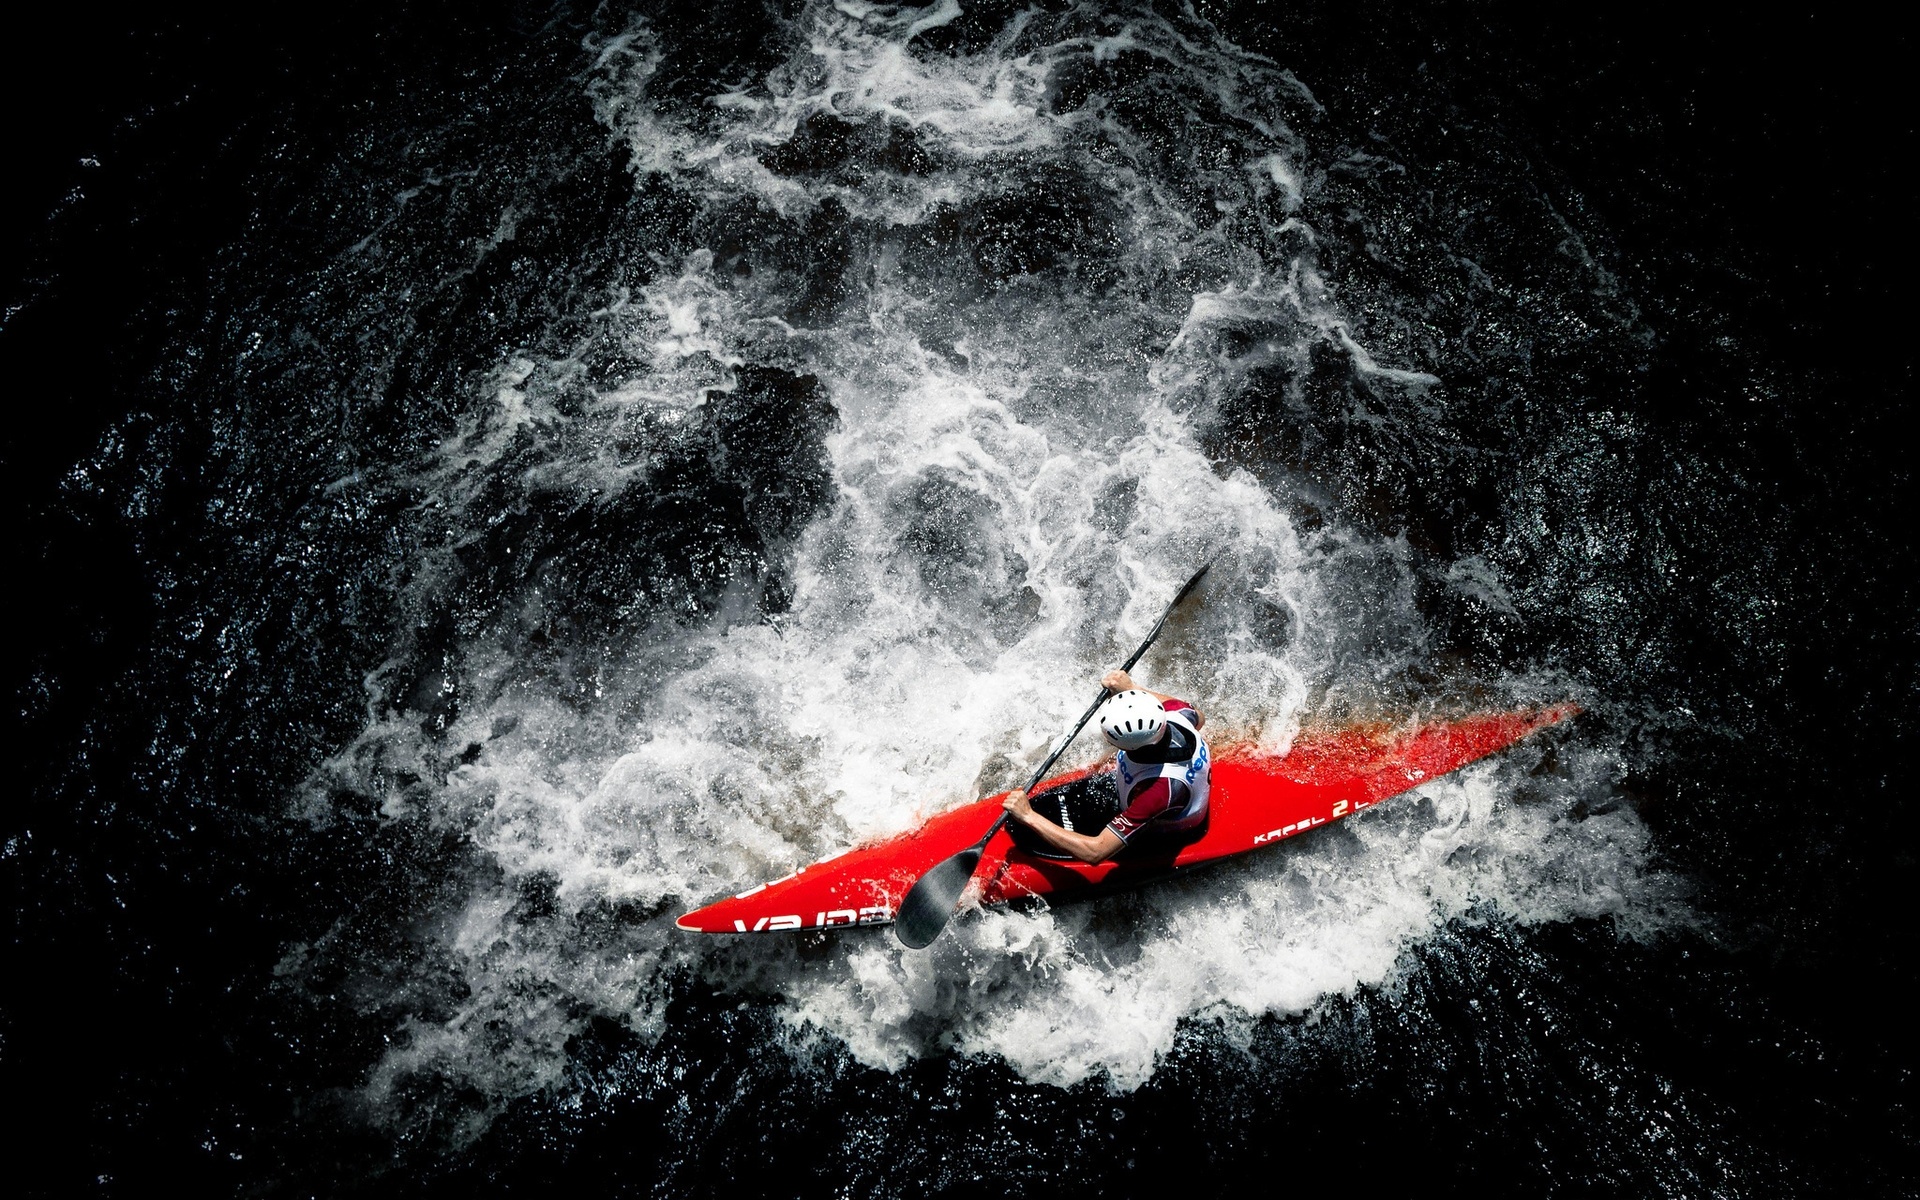 Rowing: Whitewater kayaking, An extreme adventurous water sports discipline performed on intensive rivers. 1920x1200 HD Wallpaper.